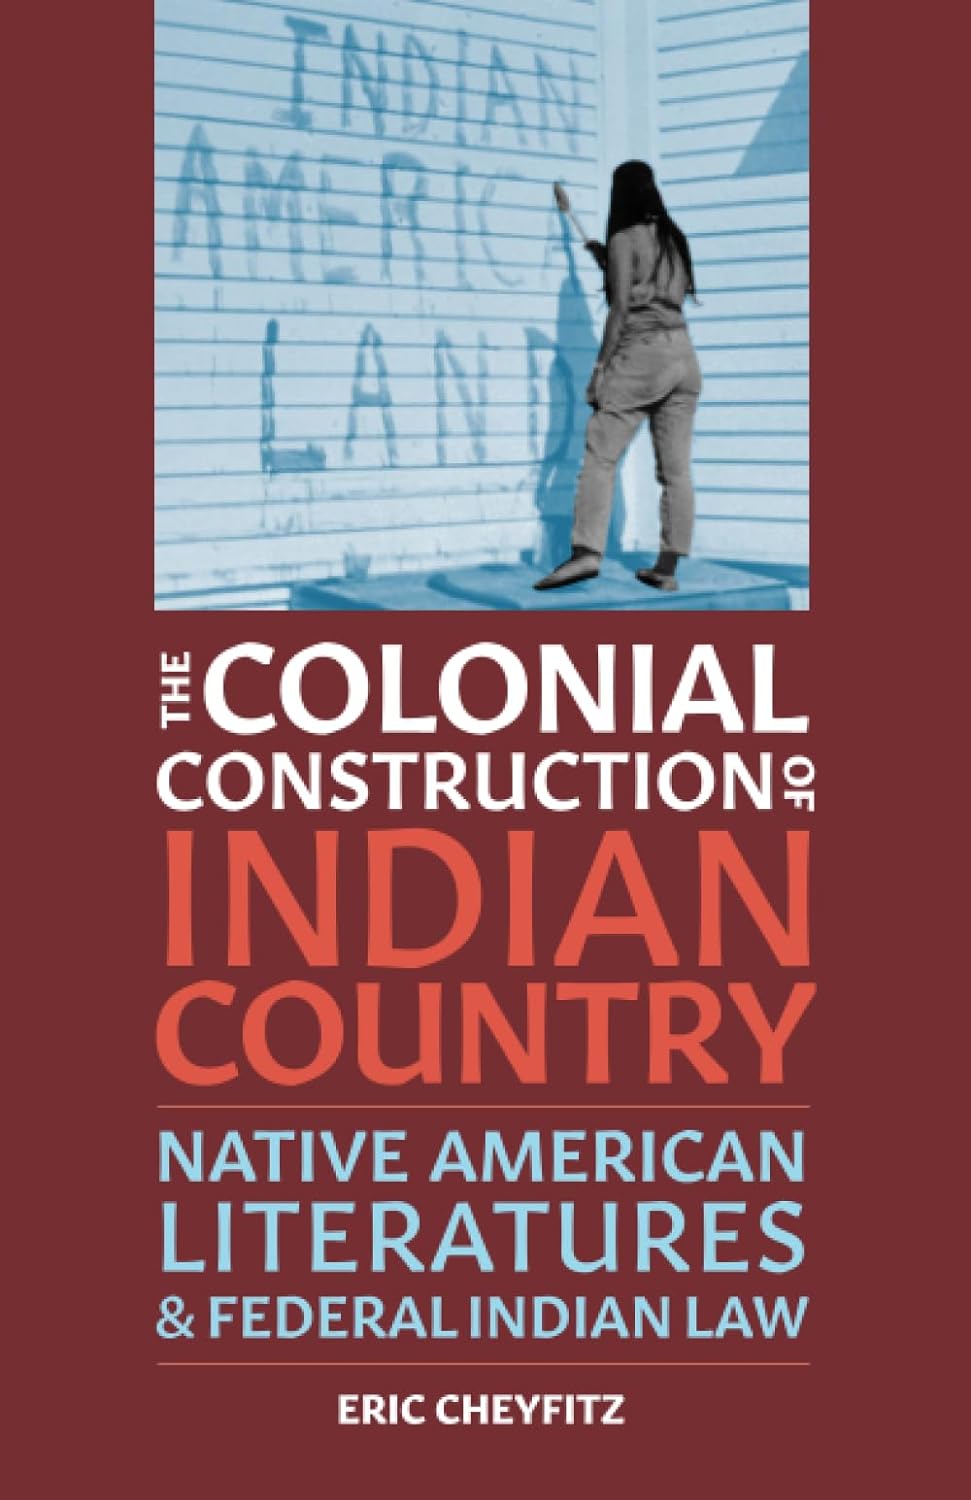 The Colonial Construction of Indian Country: Native American Literatures & Federal Indian Law by Eric Cheyfitz